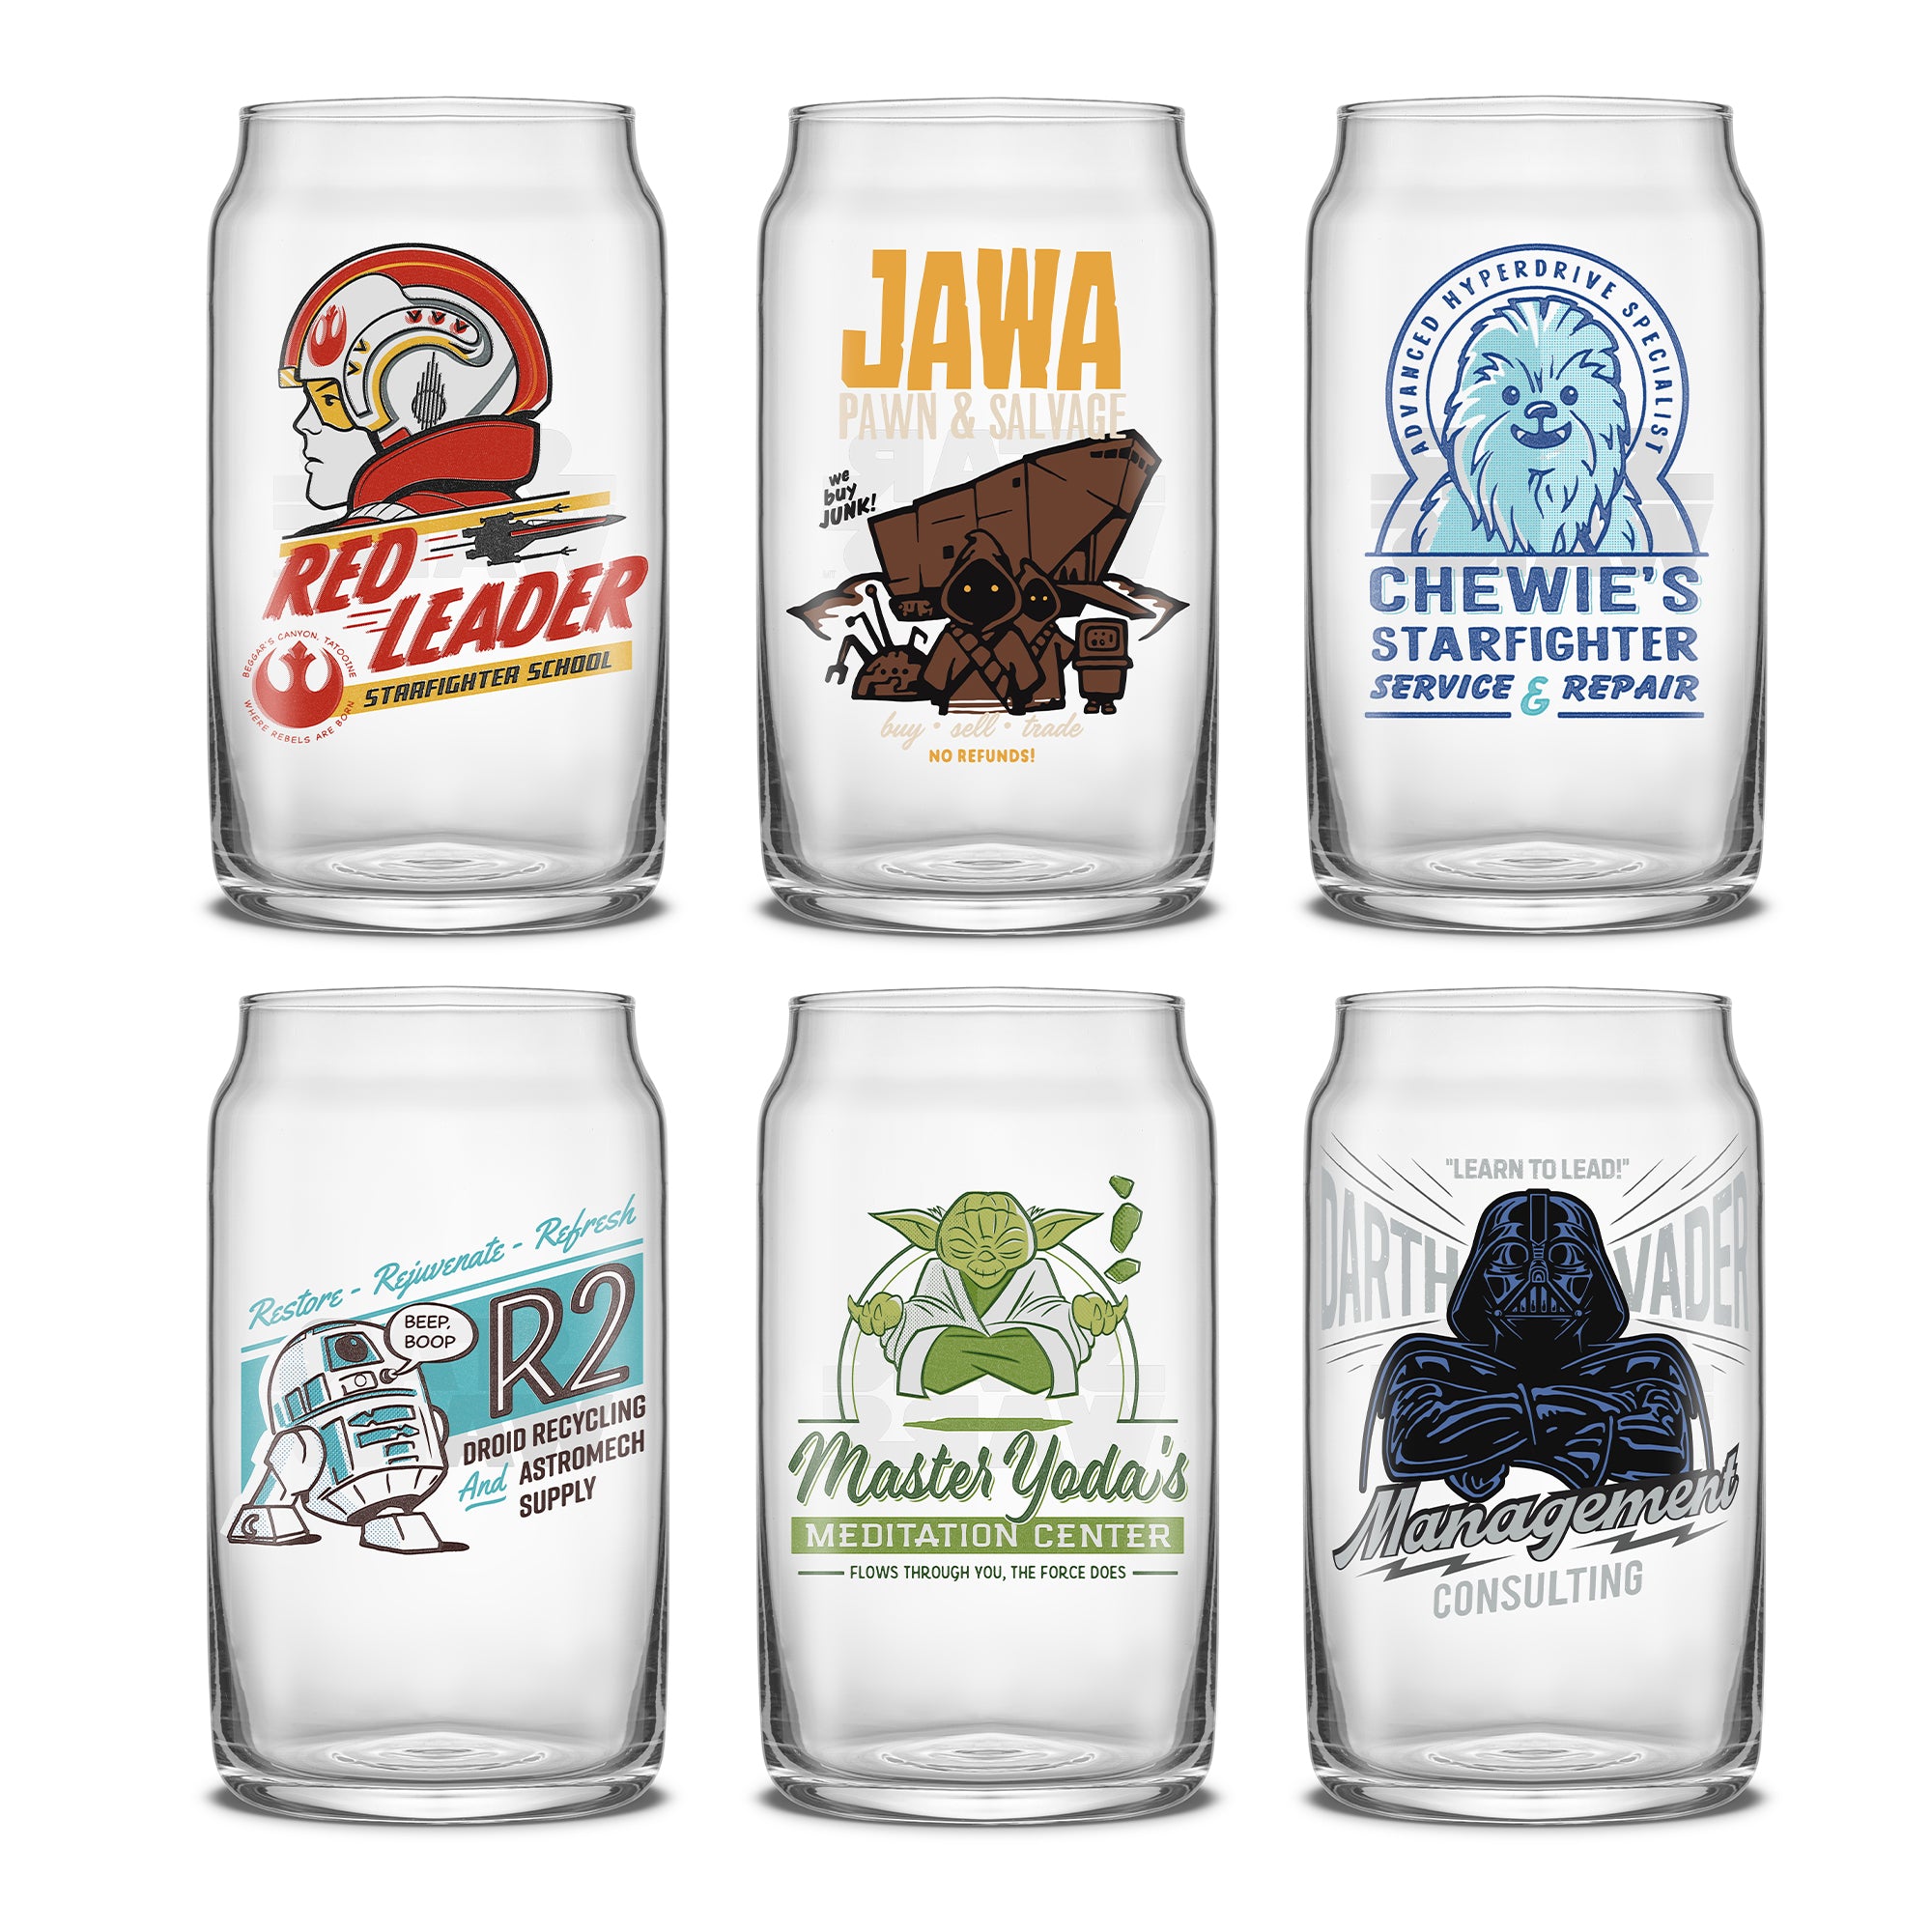 Star Wars themed can shaped drinking glasses in a retro style featuring Red Leader, Jawa, Chewbacca, R2D2, Yoda, and Darth Vader.